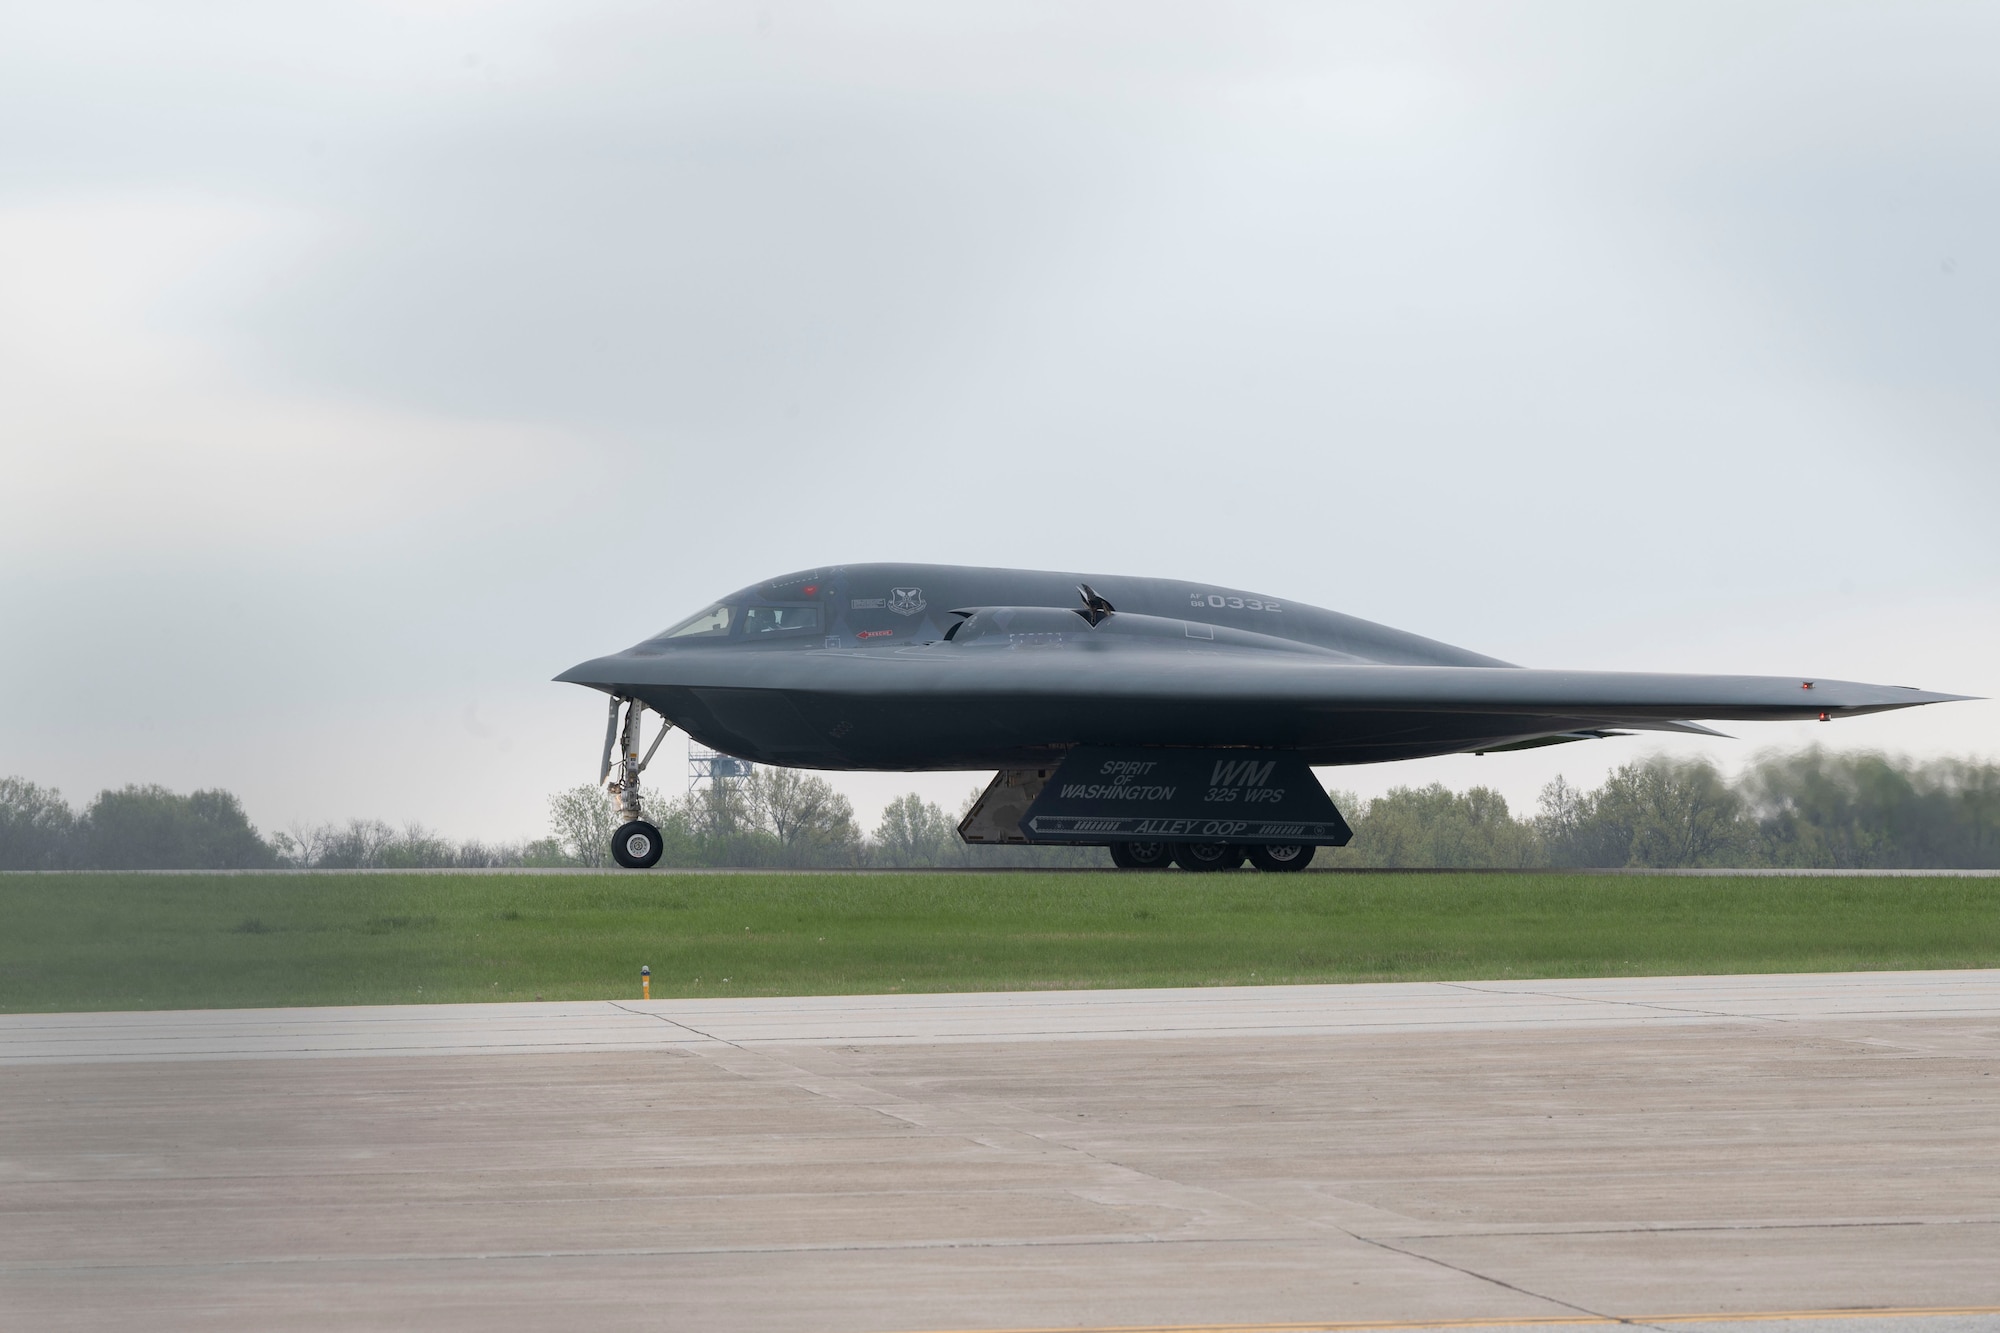 A B-2 Spirit stealth bomber assigned to the 509th Bomb Wing taxis to the runway at Whiteman Air Force Base, Mo., April 15, 2024. Spirit Vigilance is one of a series of routine exercises held by Air Force Global Strike bases across the Air Force that focus on the training and readiness of Airmen. These exercises are regularly planned and are conducted to continuously evaluate and enhance U.S. deterrence capabilities. (U.S. Air Force photo by Tech. Sgt. Anthony Hetlage)